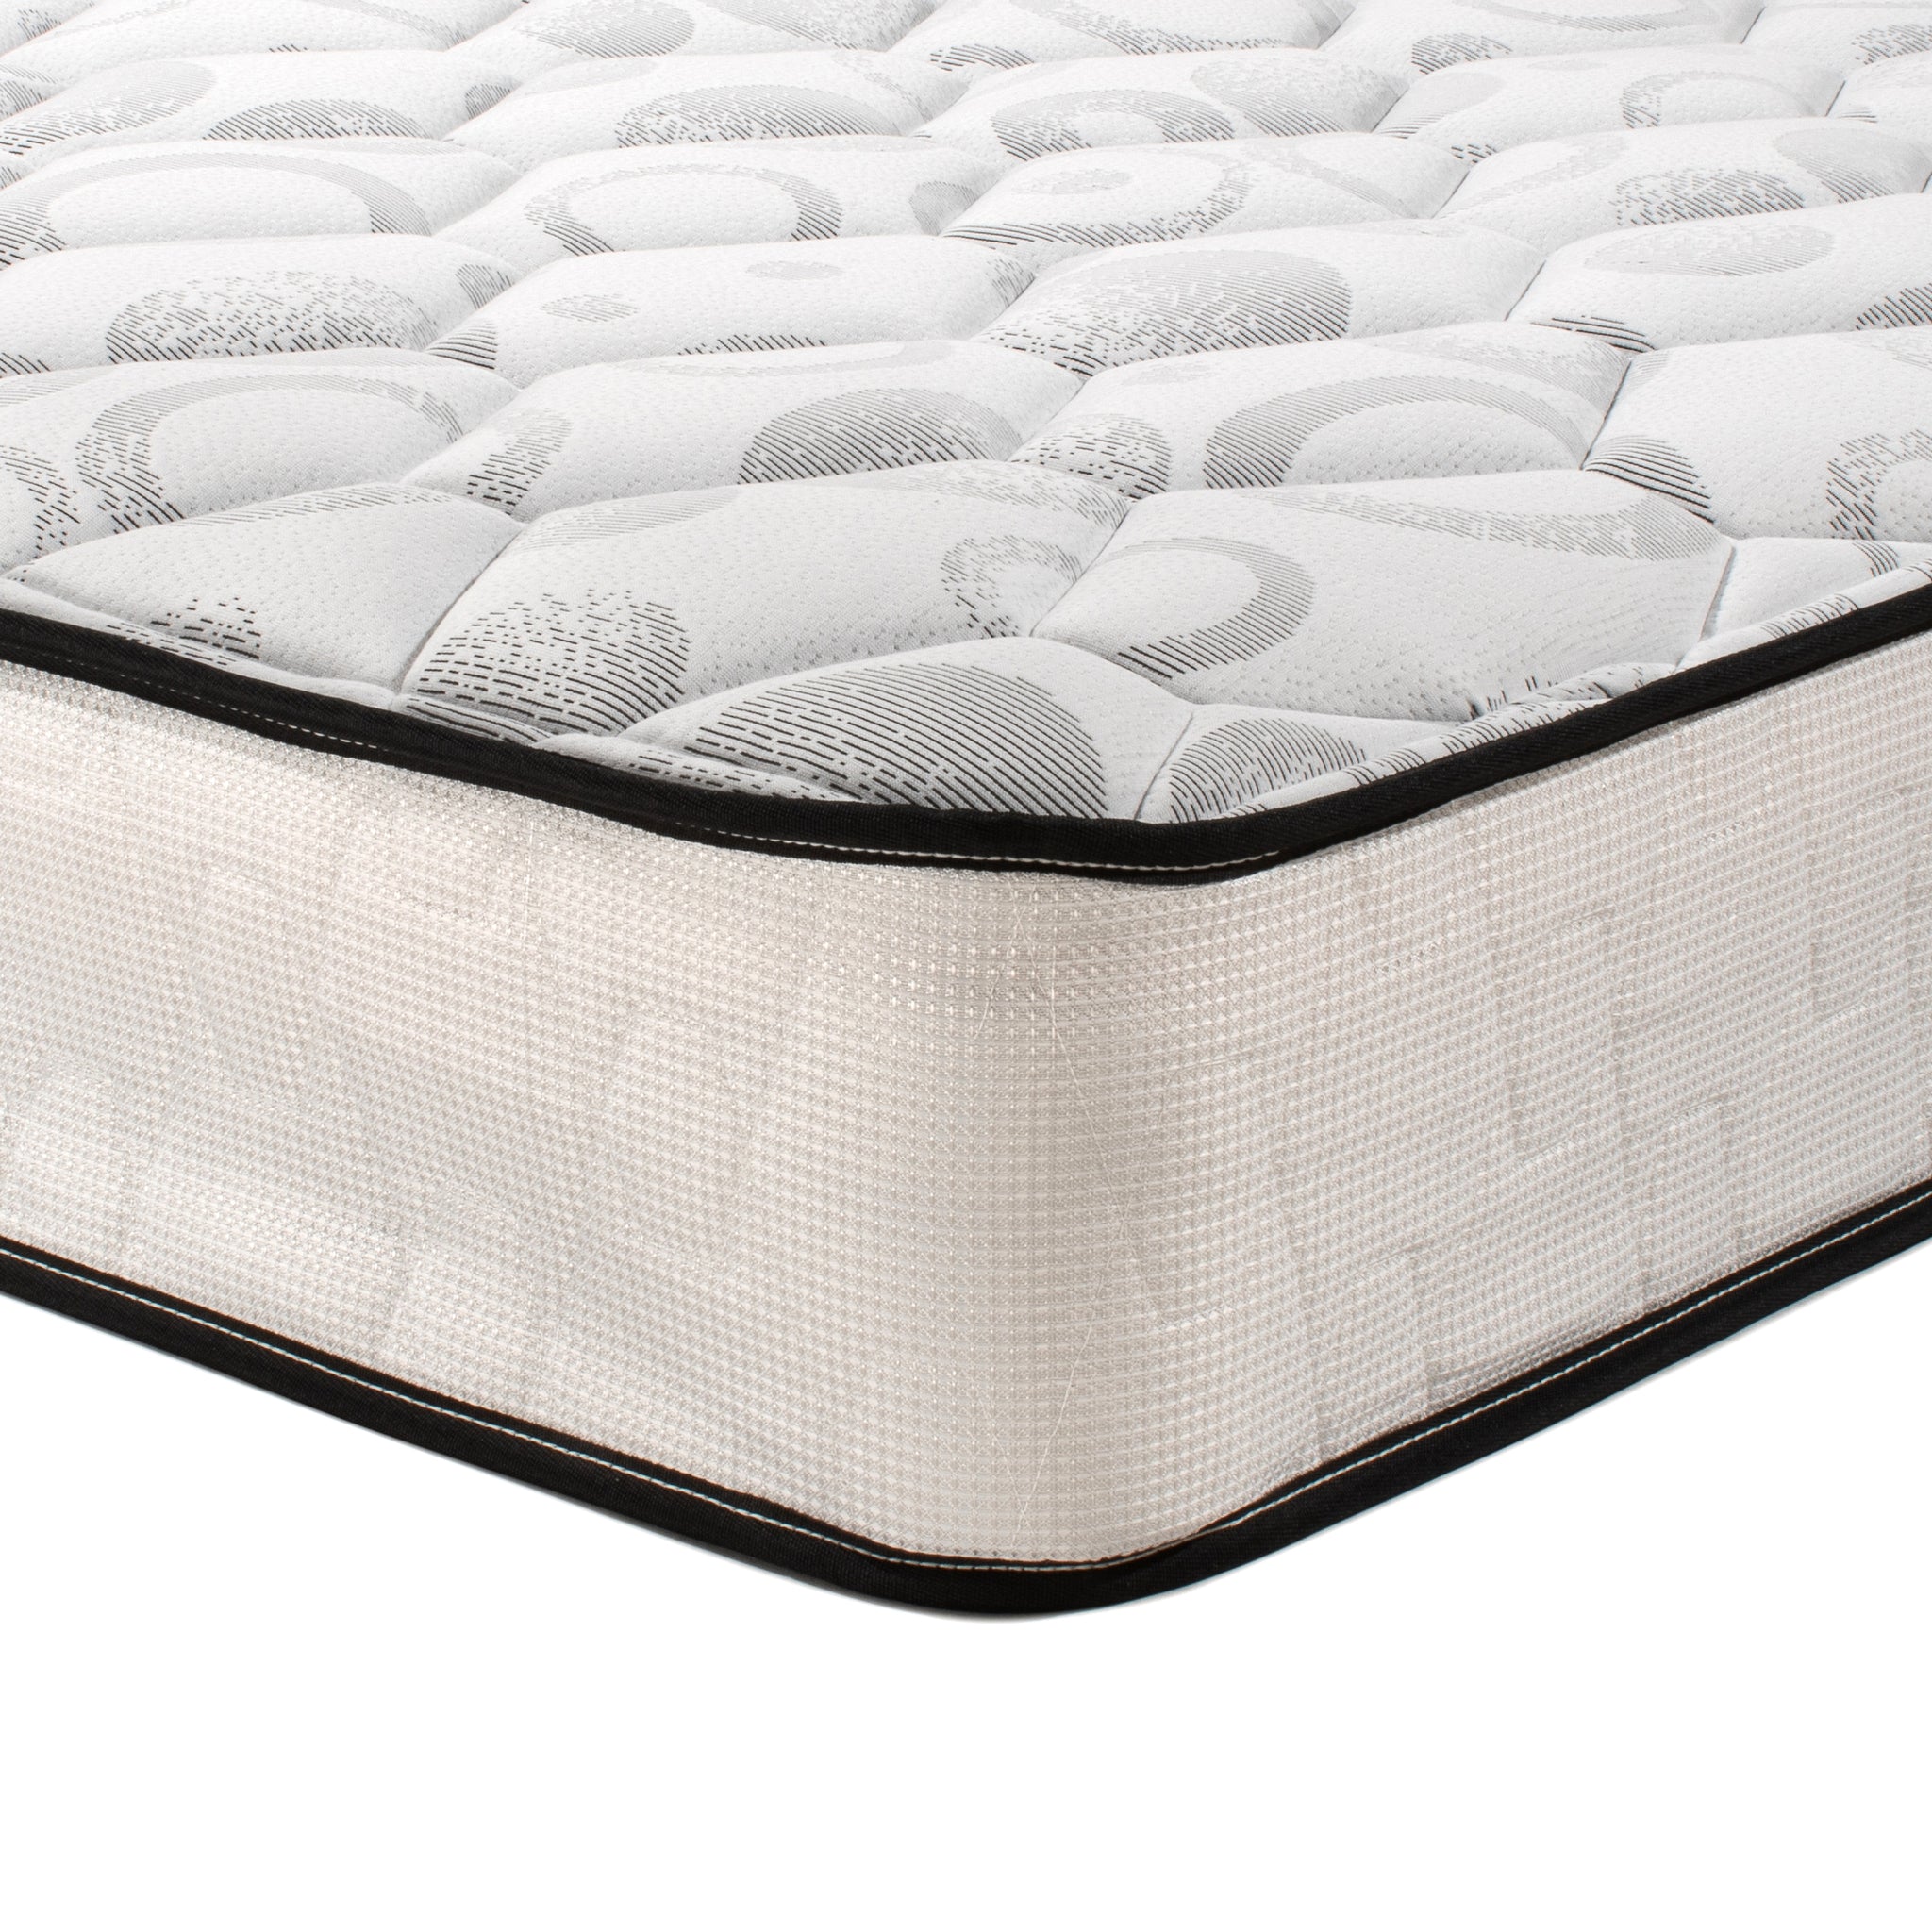 Snooze Time King Size Innerspring Mattress - Australian Made - 5 Year Warranty - Free Delivery - Melbourne Mattress Factory